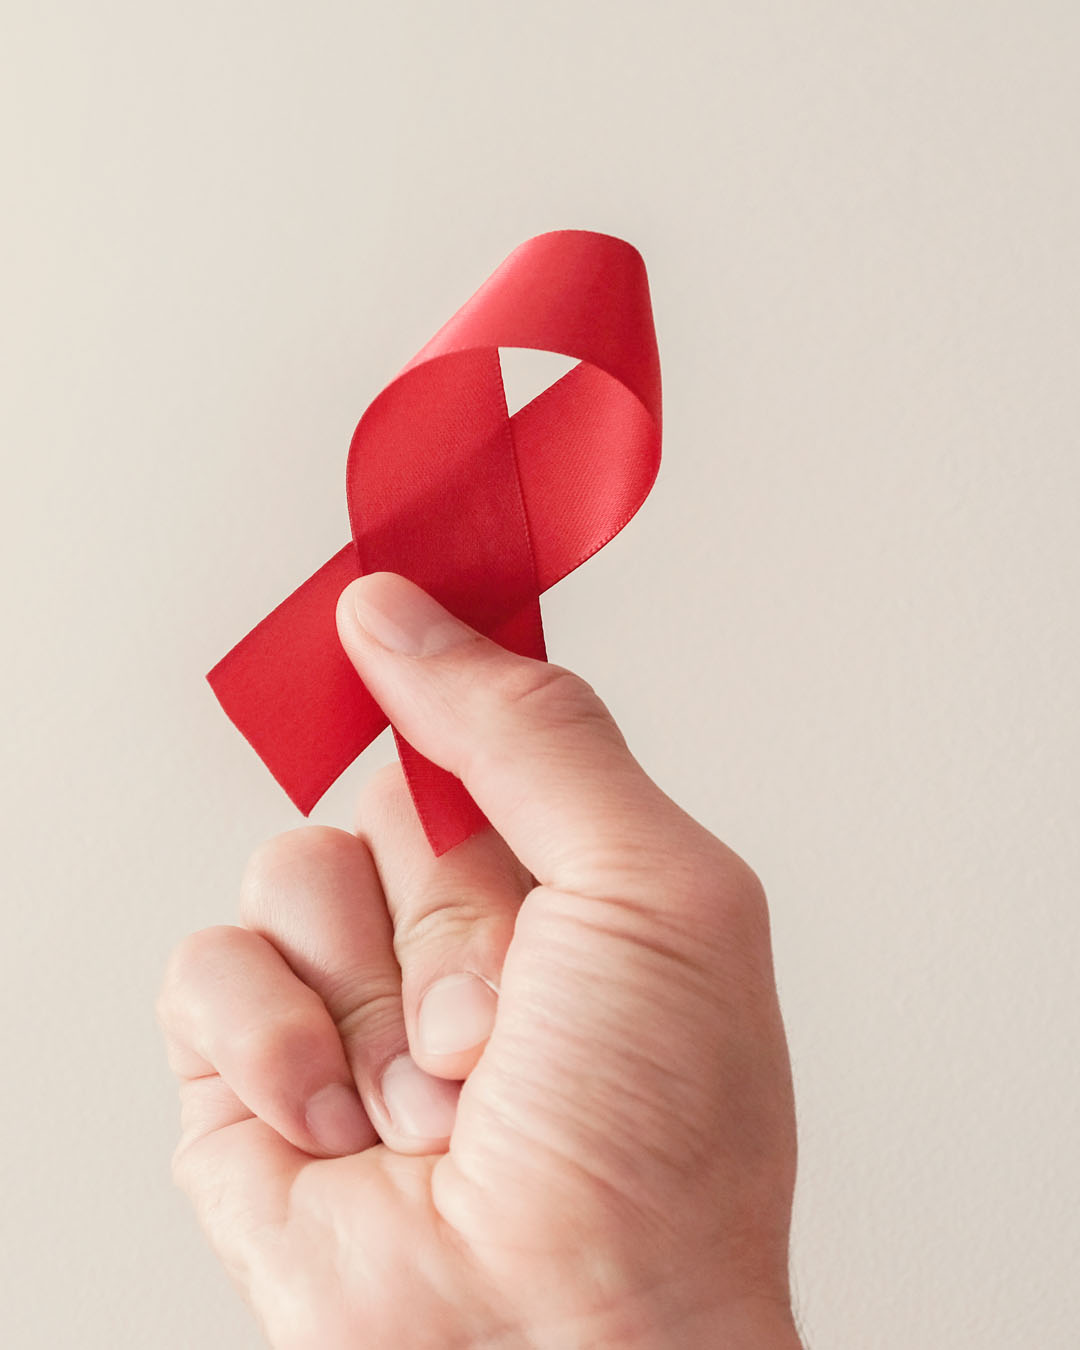 Ending AIDS: World Will Fall Short of 2020 Targets